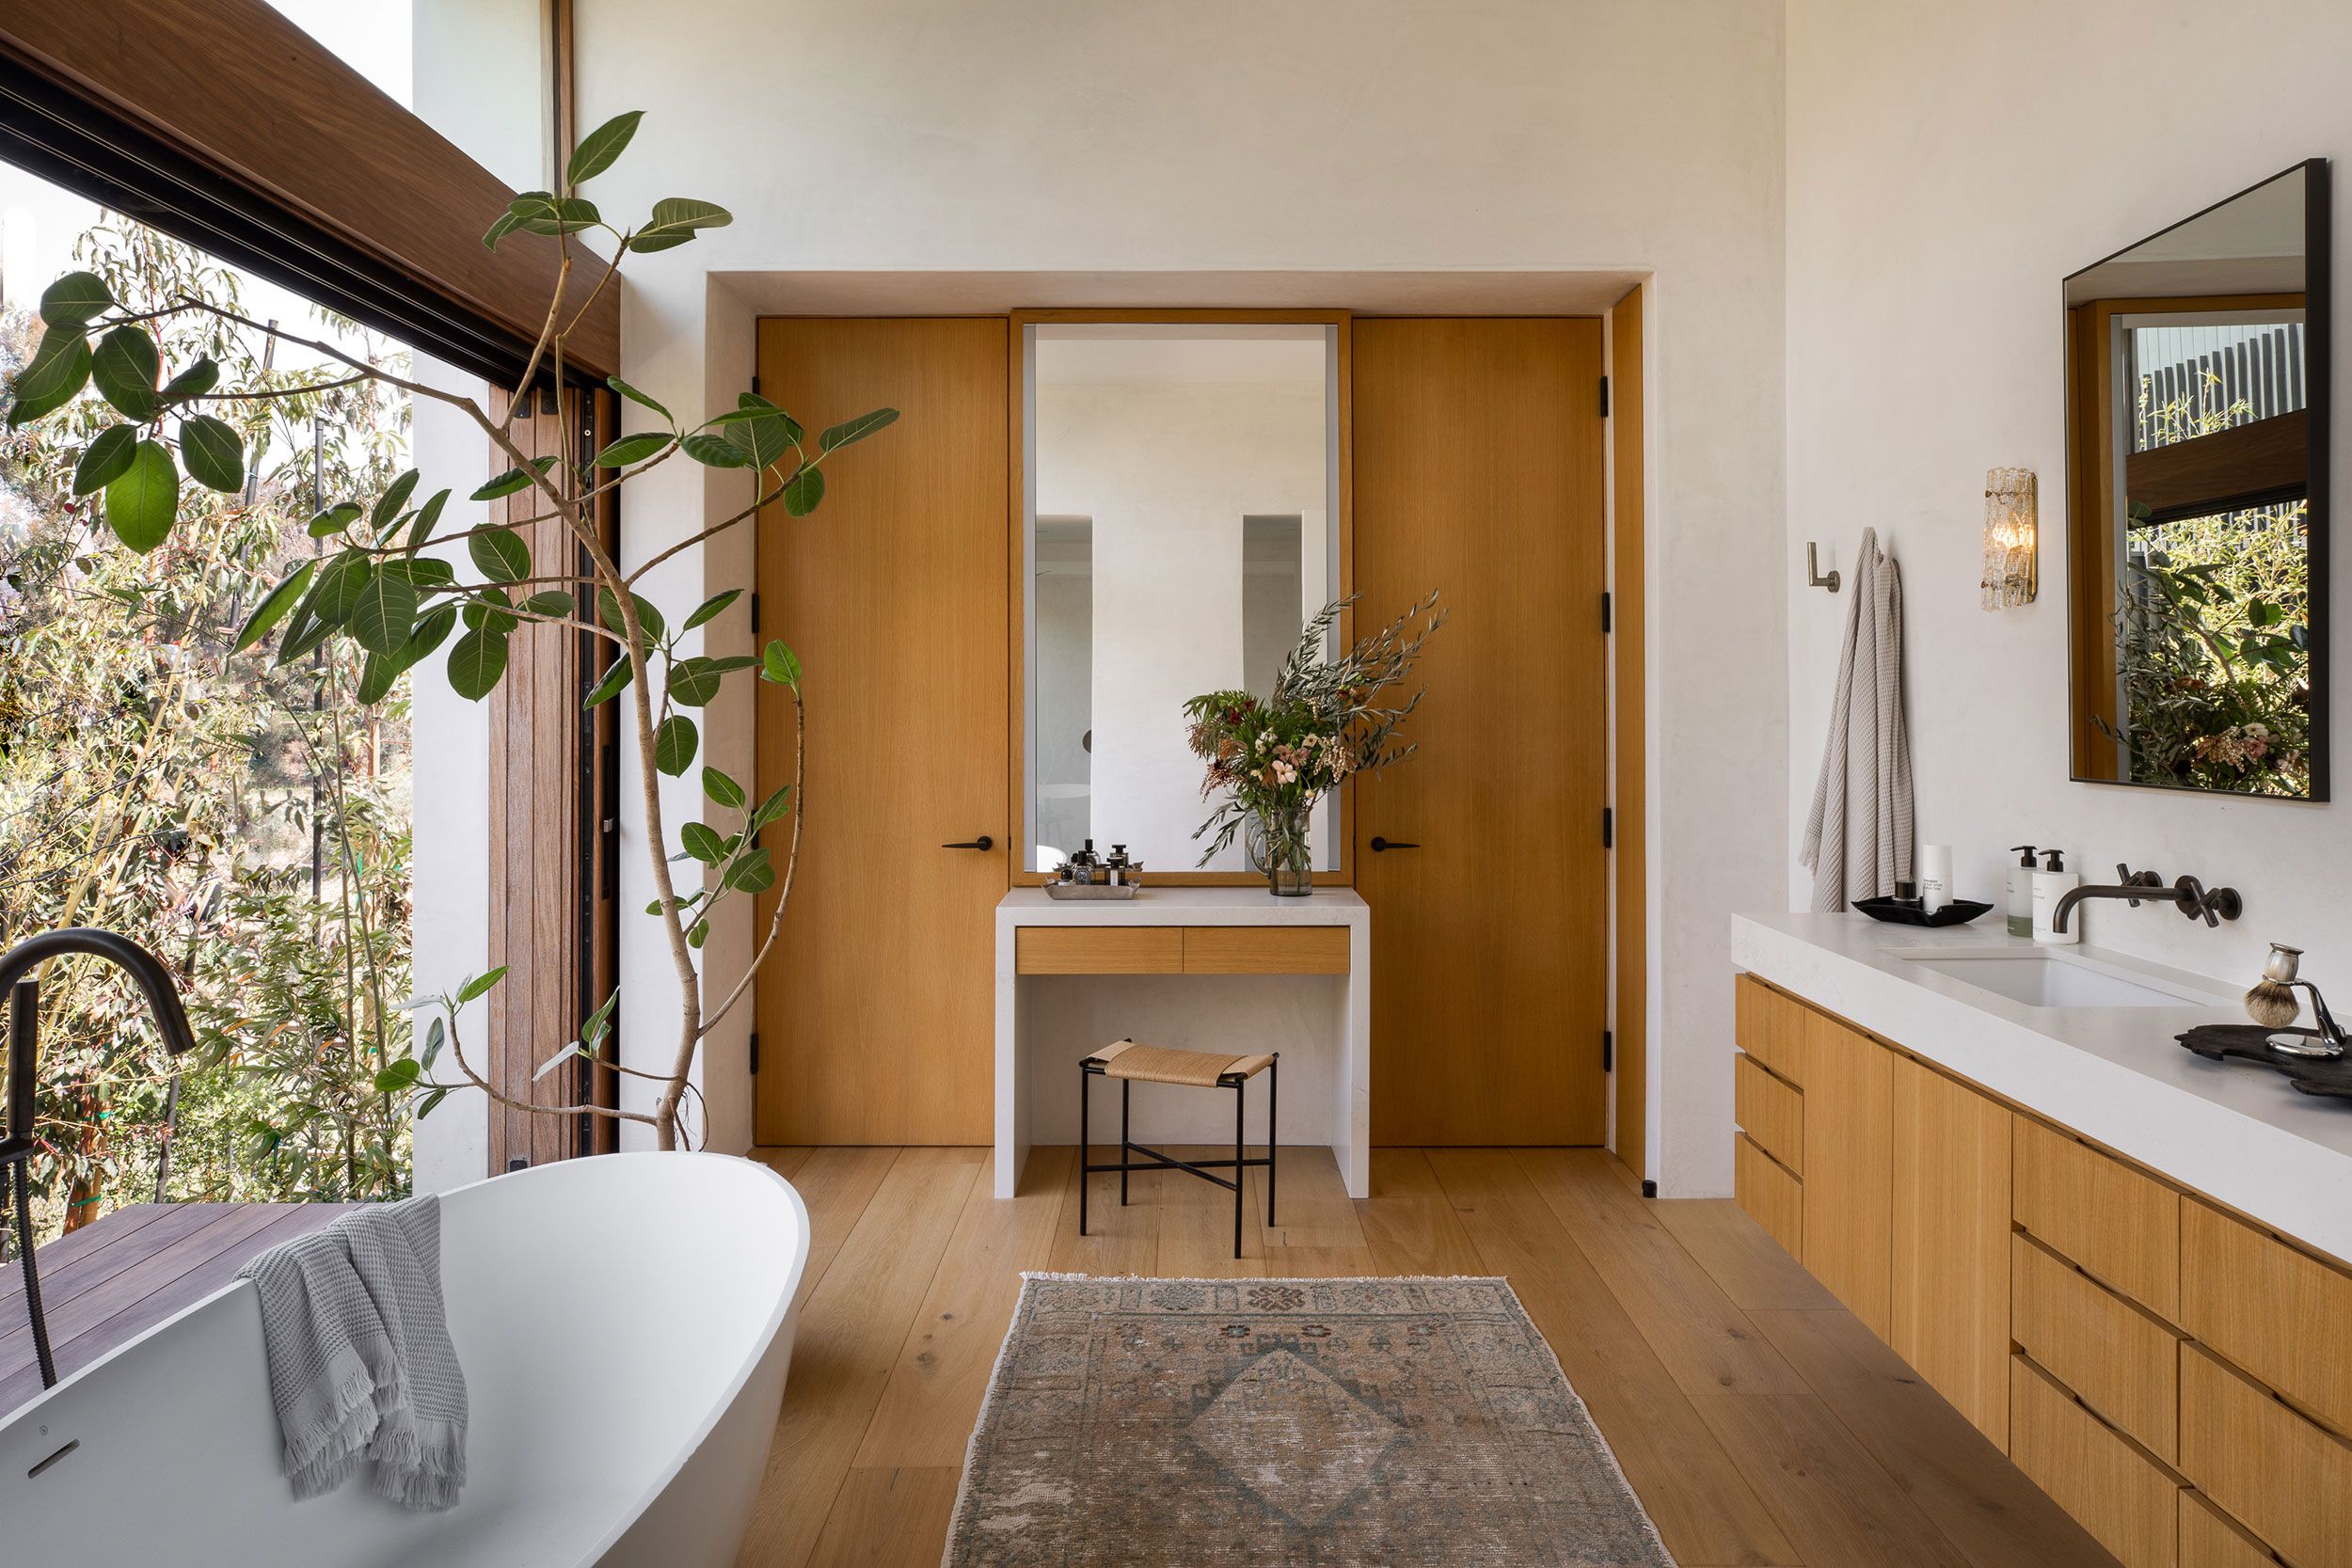 Today’s Modern Bathrooms: Elegant And Functional